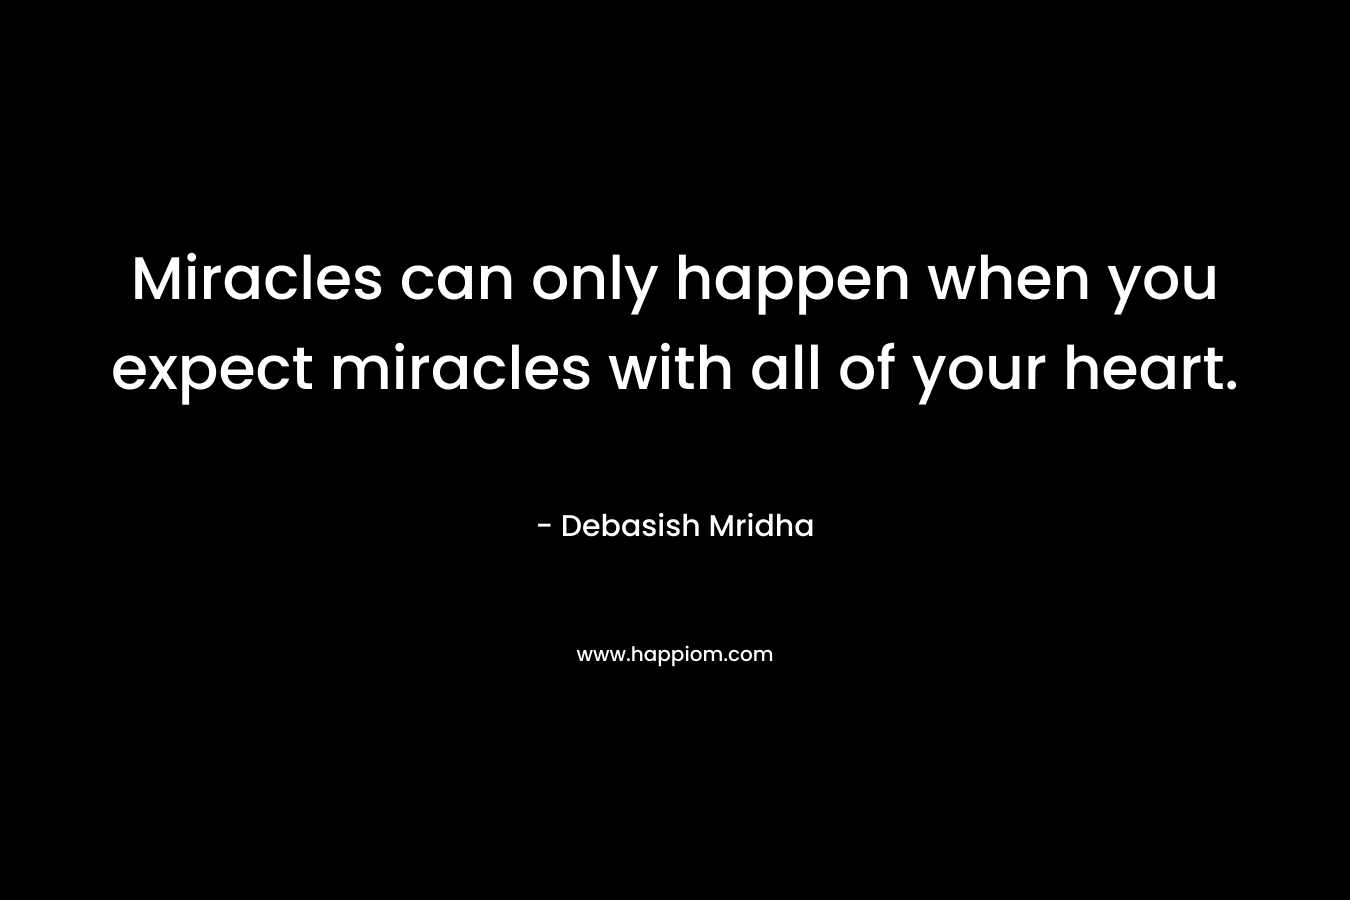 Miracles can only happen when you expect miracles with all of your heart.